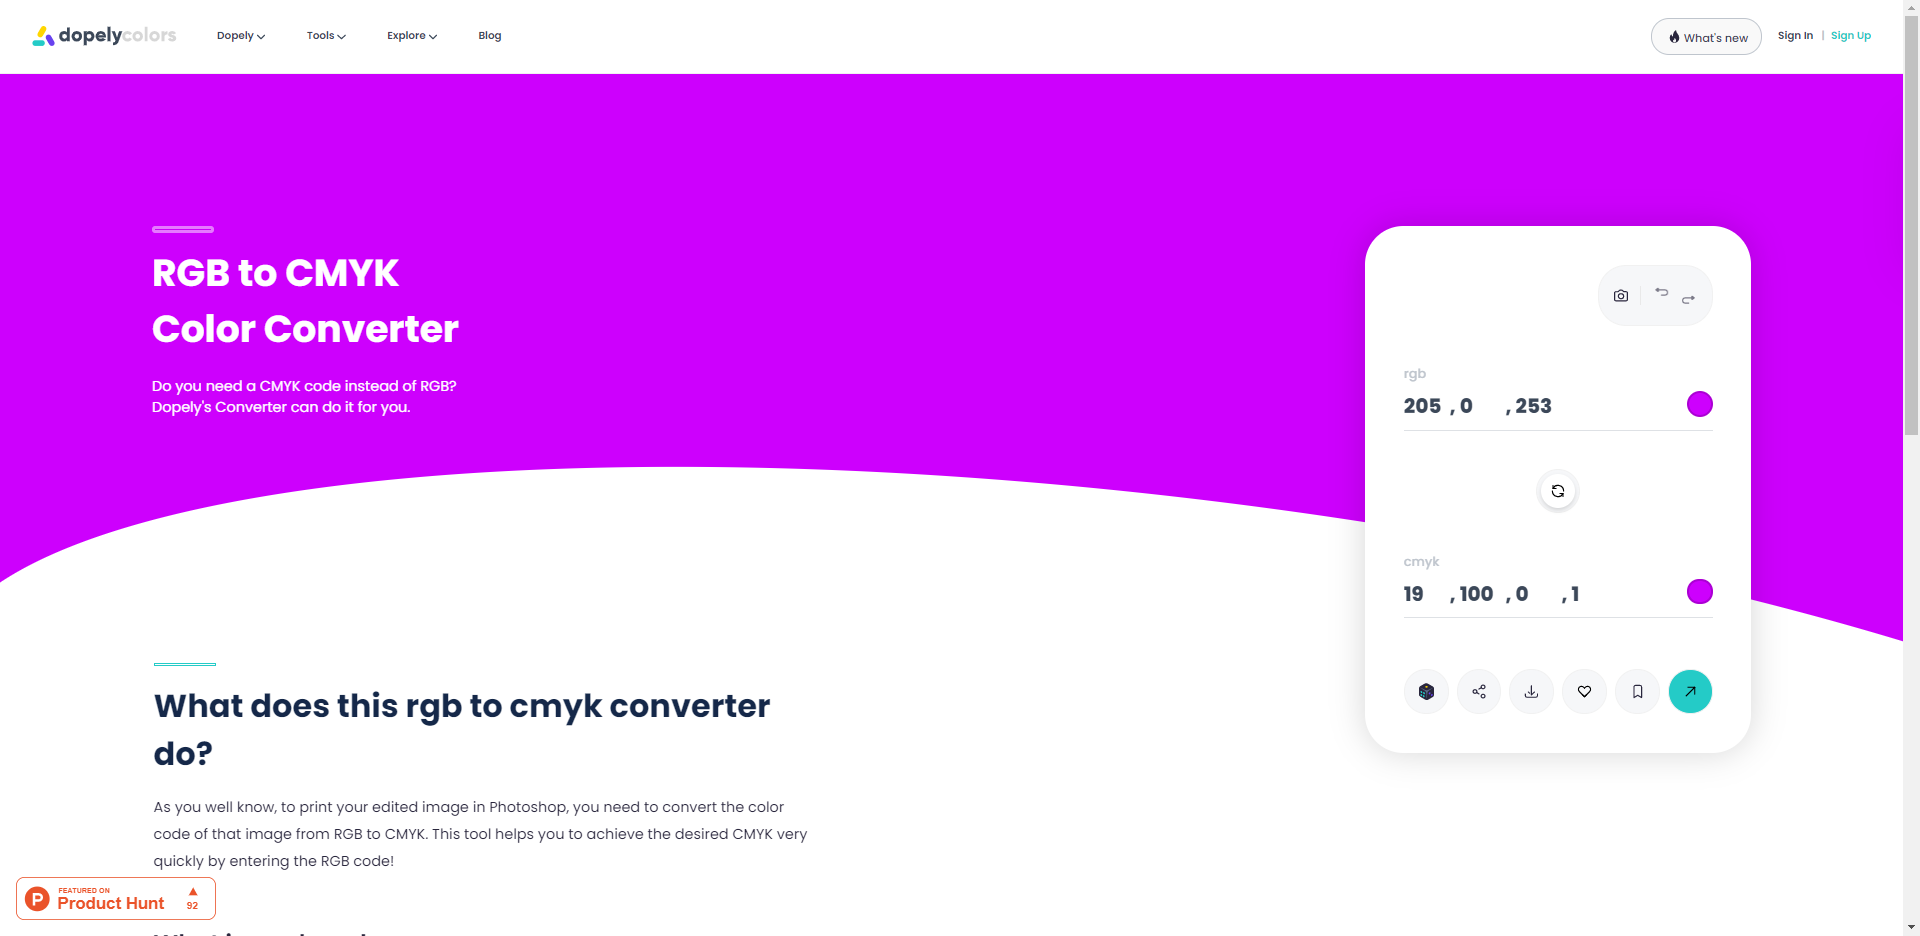 A picture from a converter tool in dopley colors web app. RGB to CMYK color convertor with purple and with background and a paragraph about how this tool works.